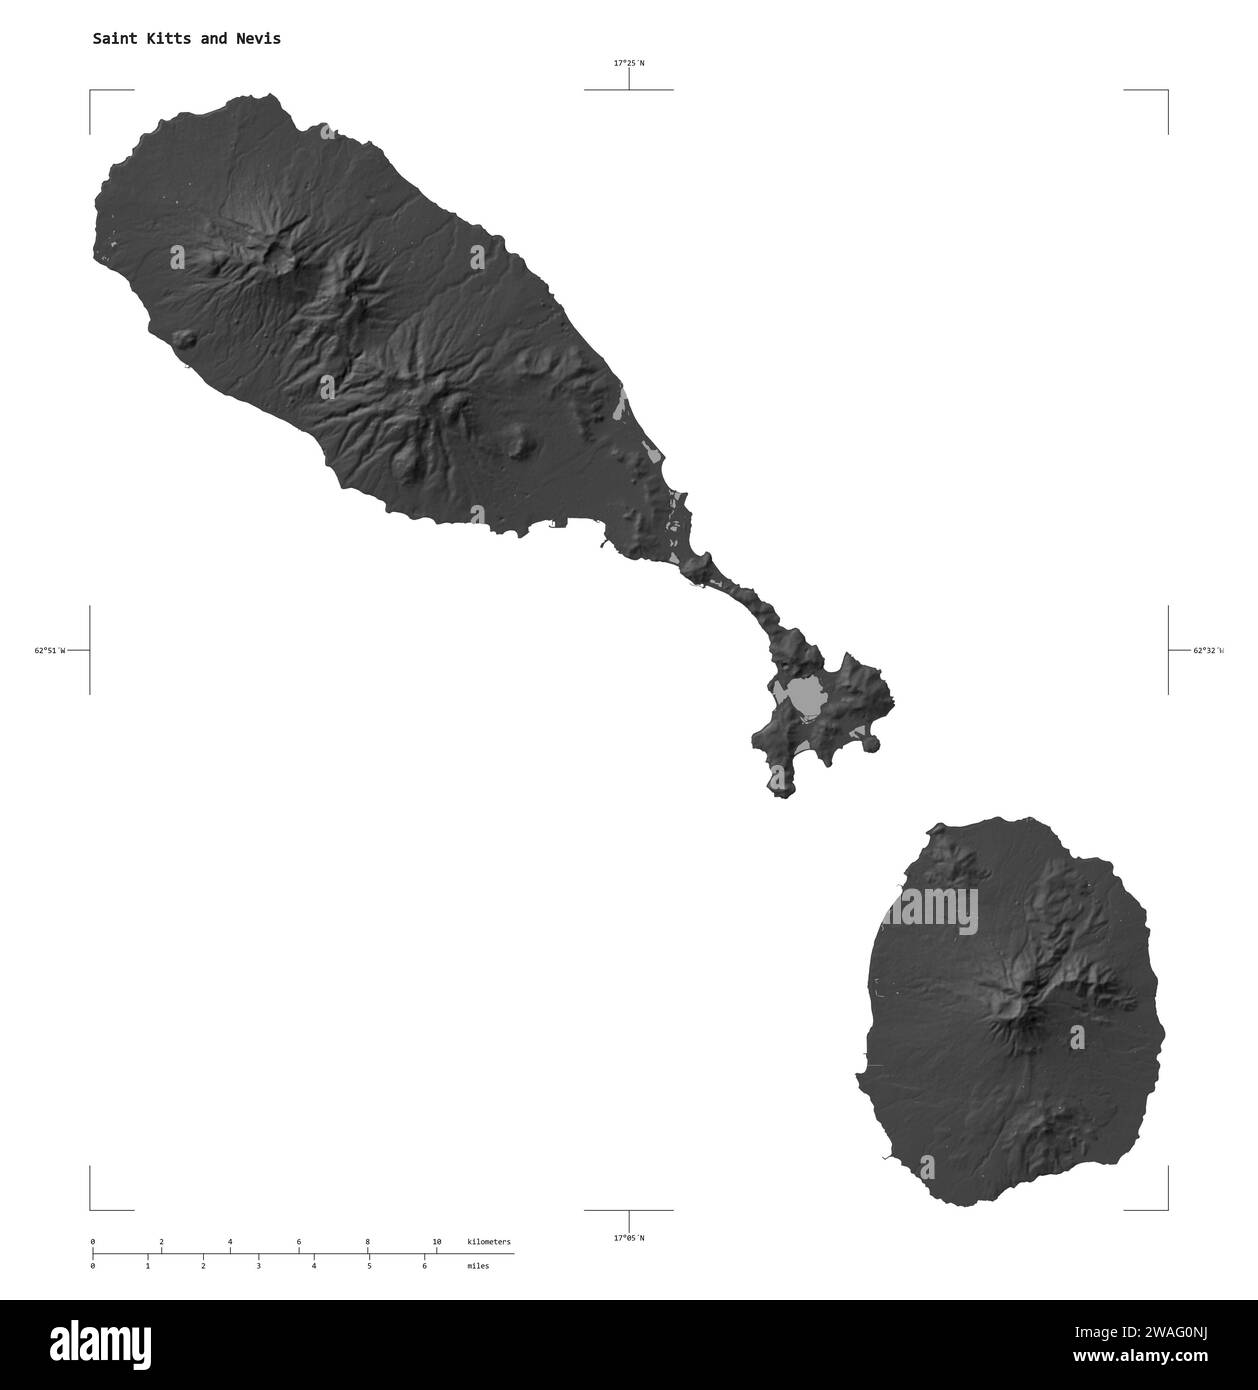 Shape of a Bilevel elevation map with lakes and rivers of the Saint Kitts and Nevis, with distance scale and map border coordinates, isolated on white Stock Photo